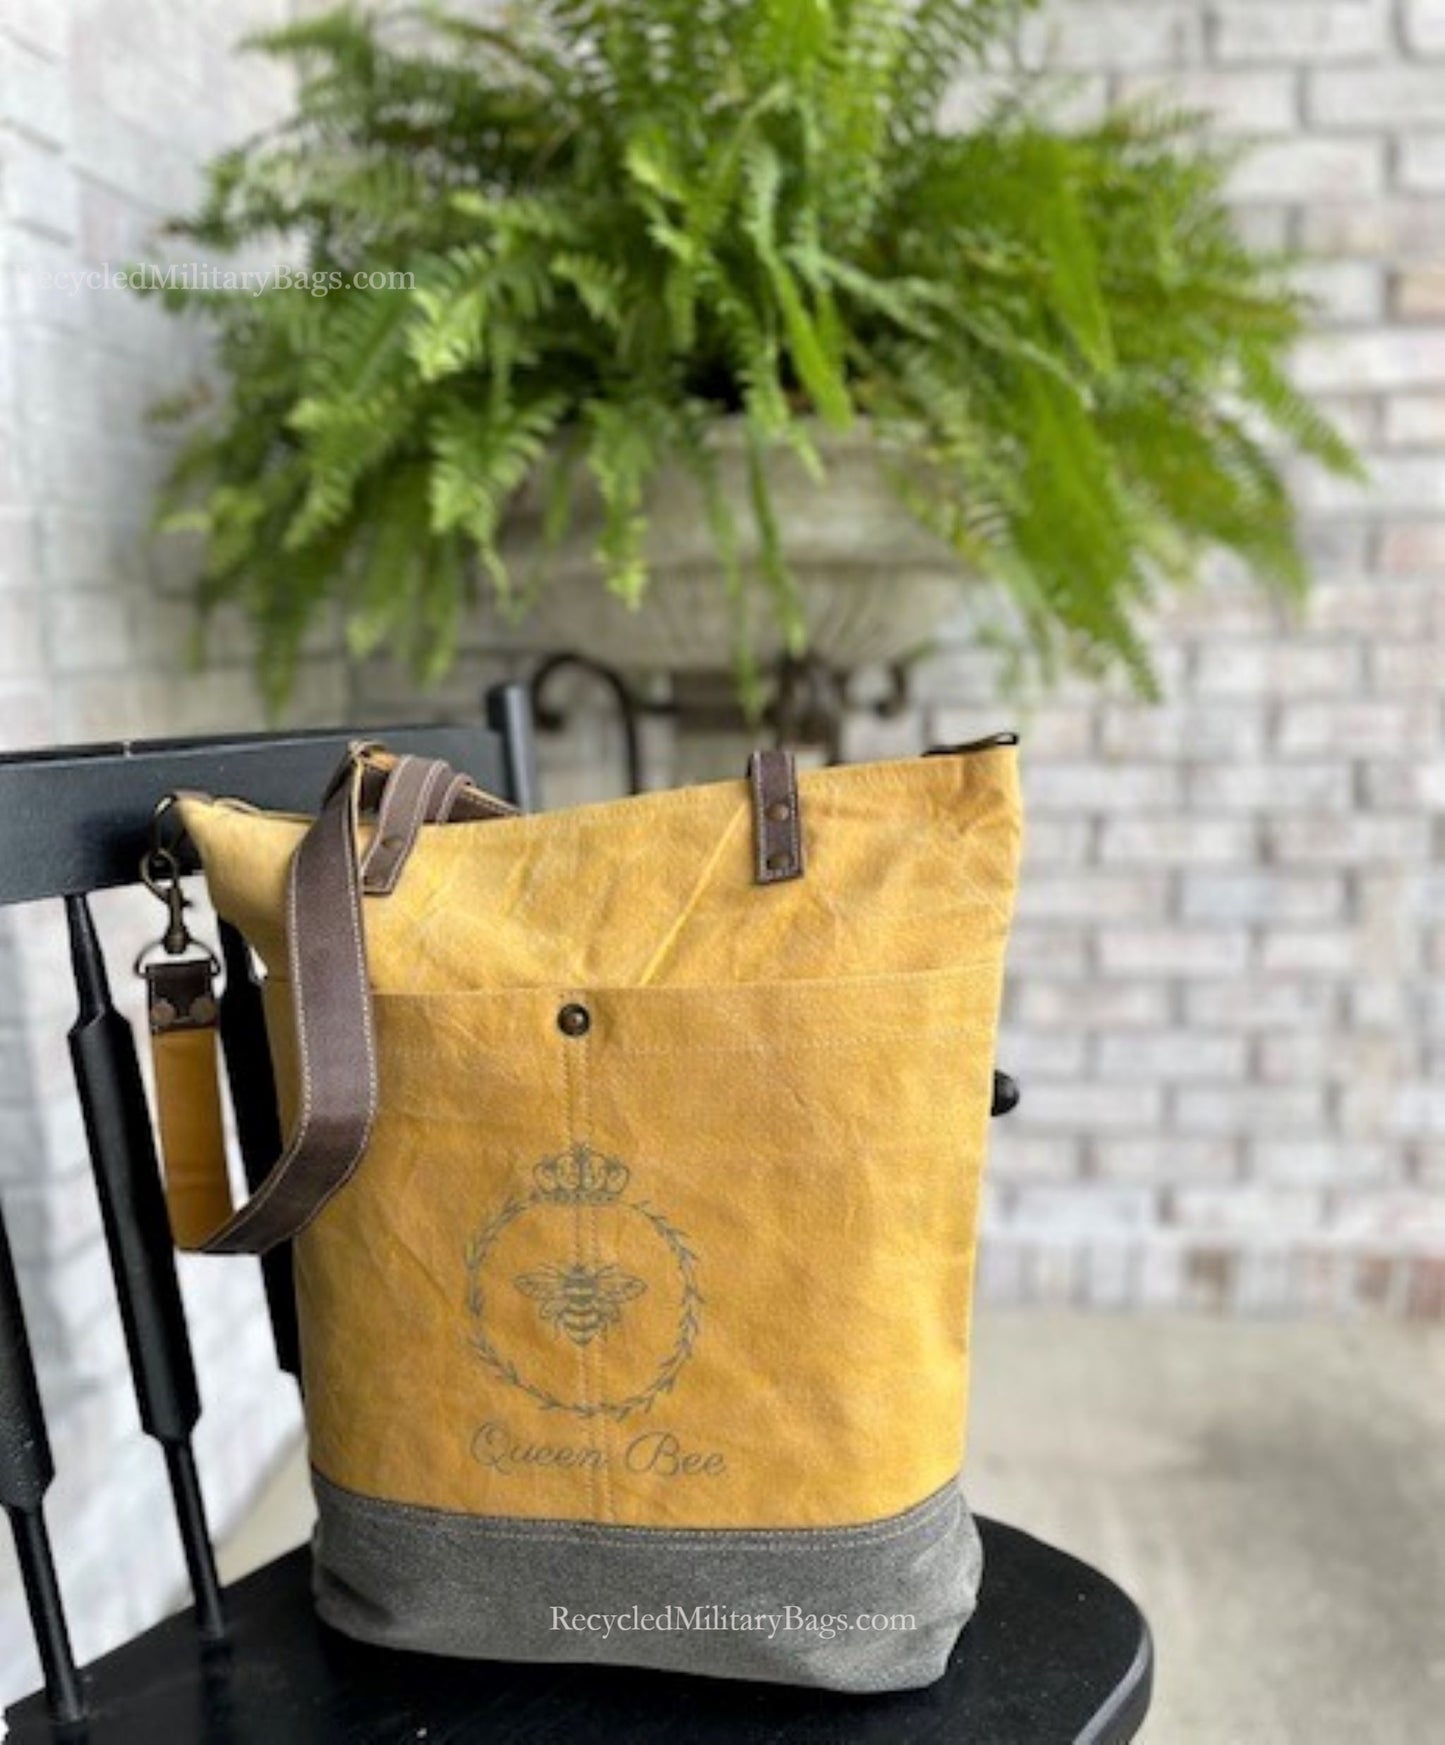 NEW Queen Bee Sustainable Canvas Purse Travel Tote or Weekender Bag